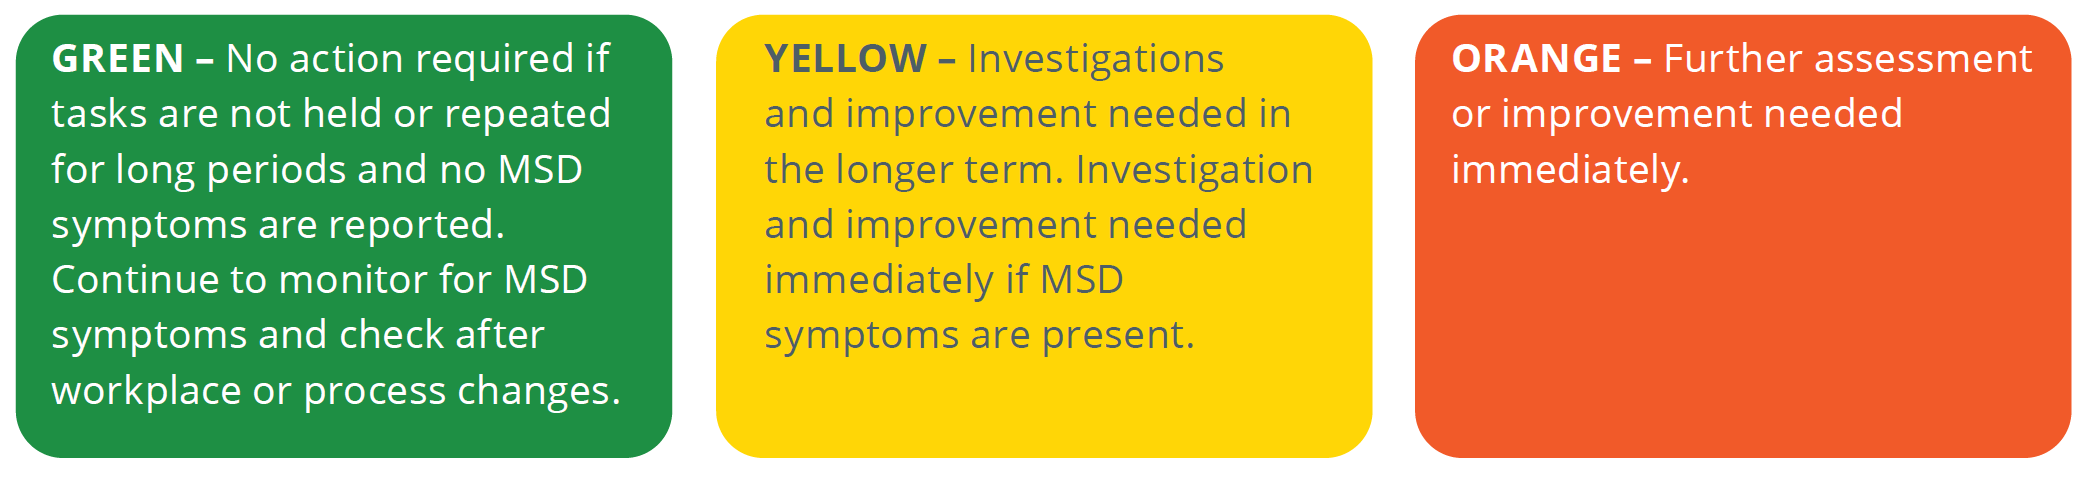 GREEN – No action required if tasks are not held or repeated for long periods and no MSD symptoms are reported. Continue to monitor for MSD symptoms and check after workplace or process changes. YELLOW – Investigations and improvement needed in the longer term. Investigation and improvement needed immediately if MSD symptoms are present. ORANGE – Further assessment or improvement needed immediately.